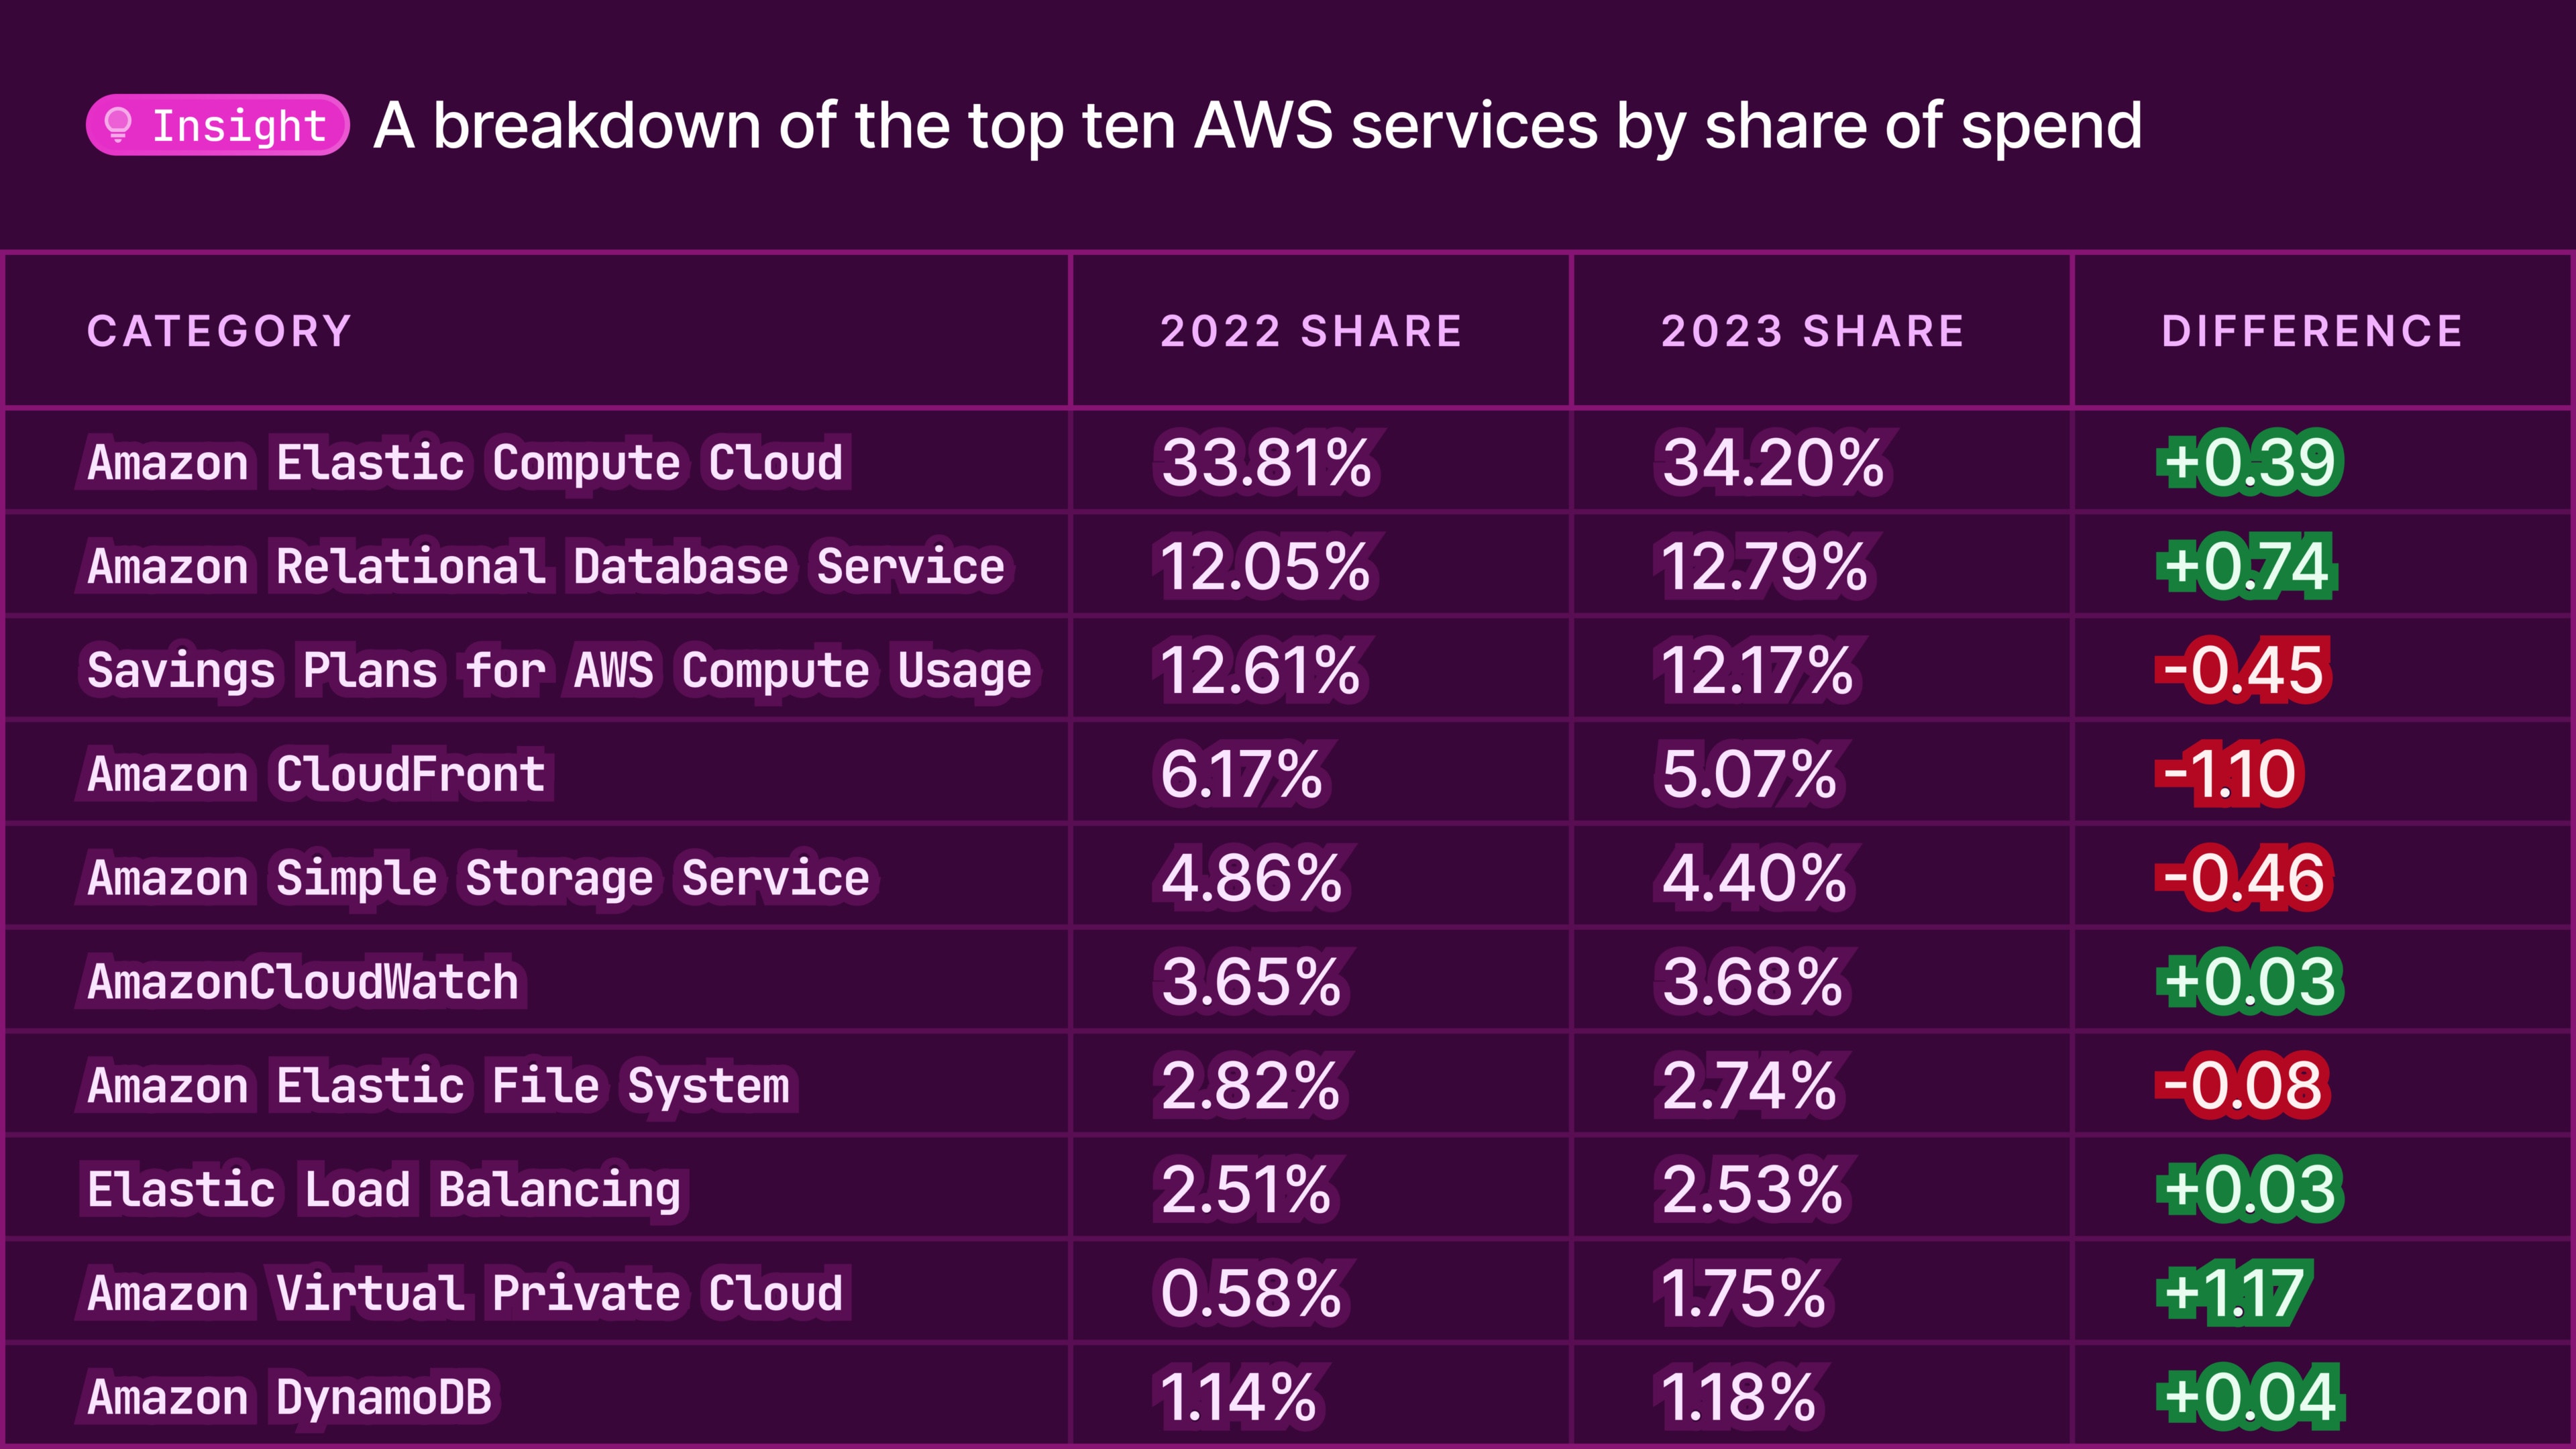 AWS services by share of spend